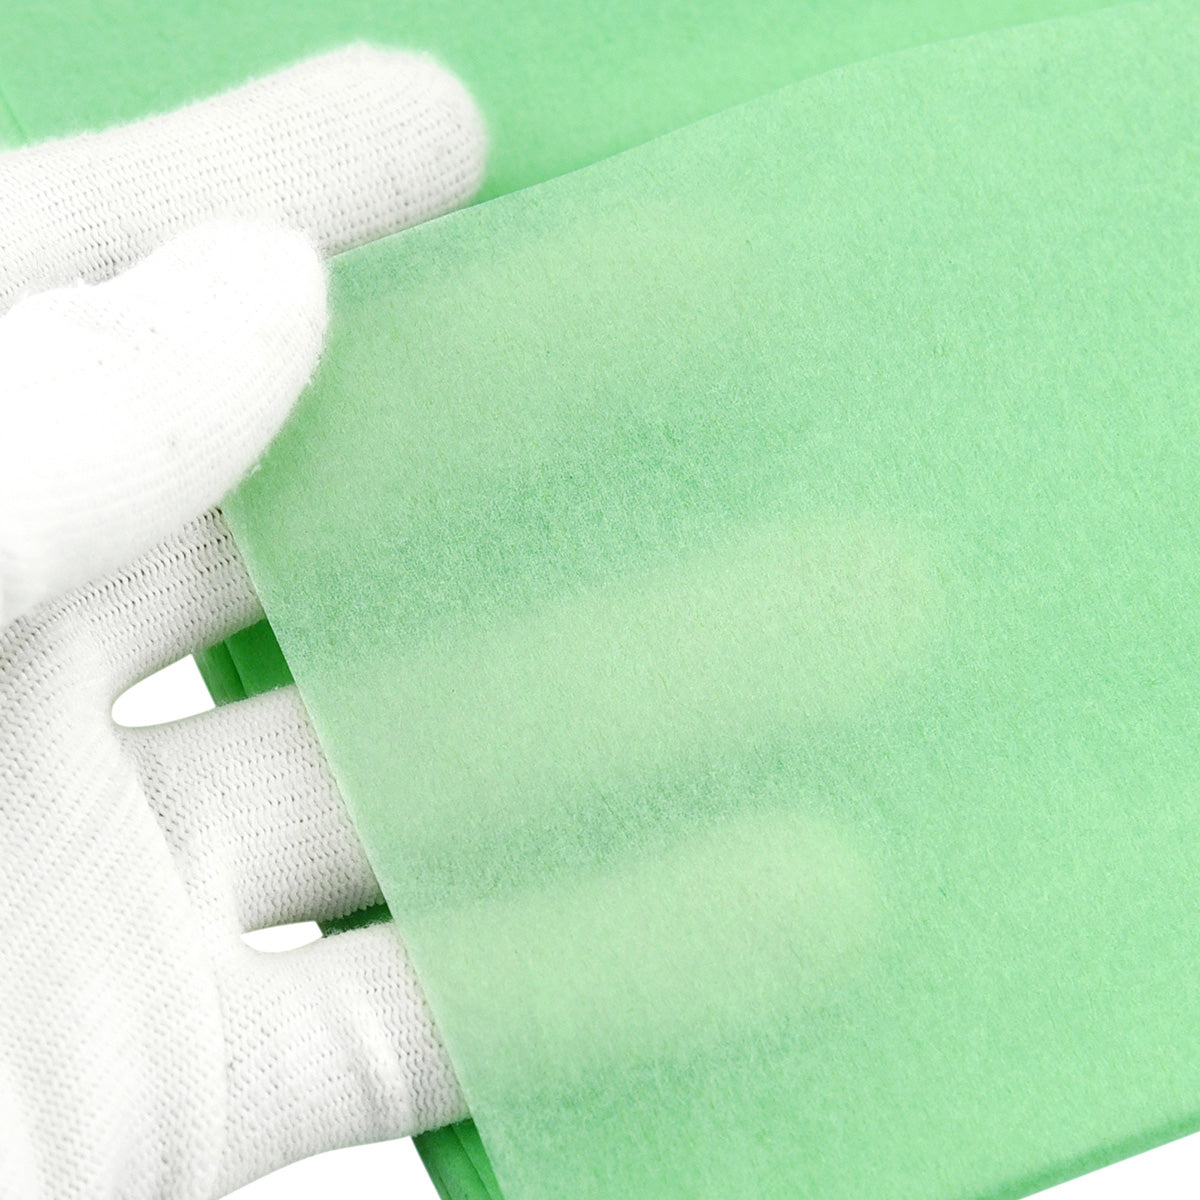 50 Sheets Light Green Wrapping Tissue Paper